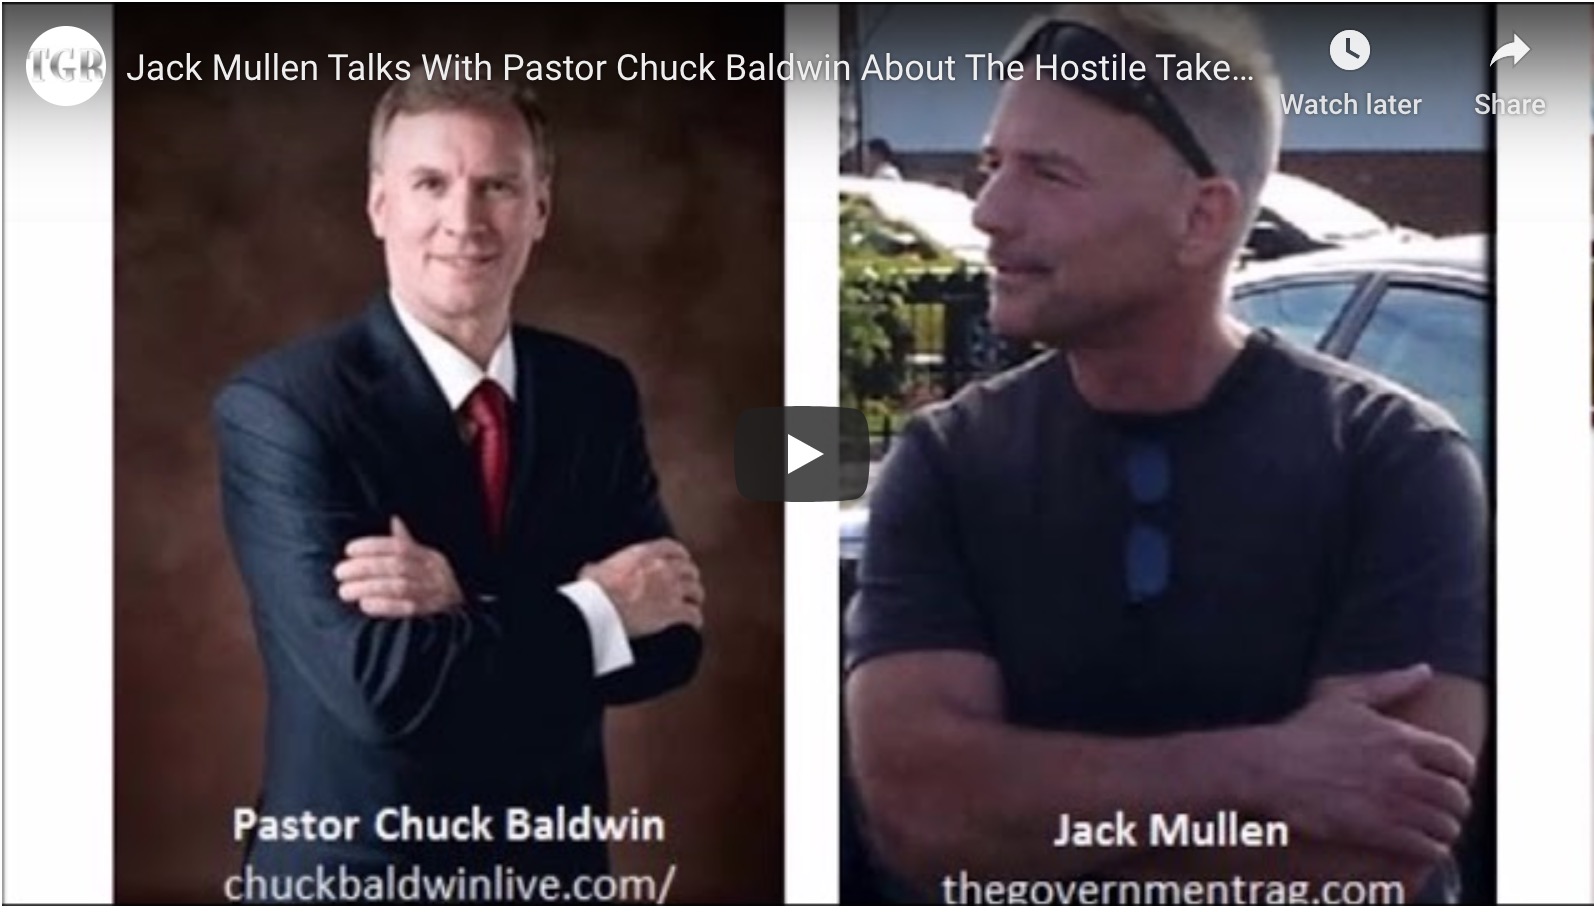 Jack Mullen Talks with Dr. Chuck Baldwin Christian Pastor about the Take Down of Civilization in Progress Now.